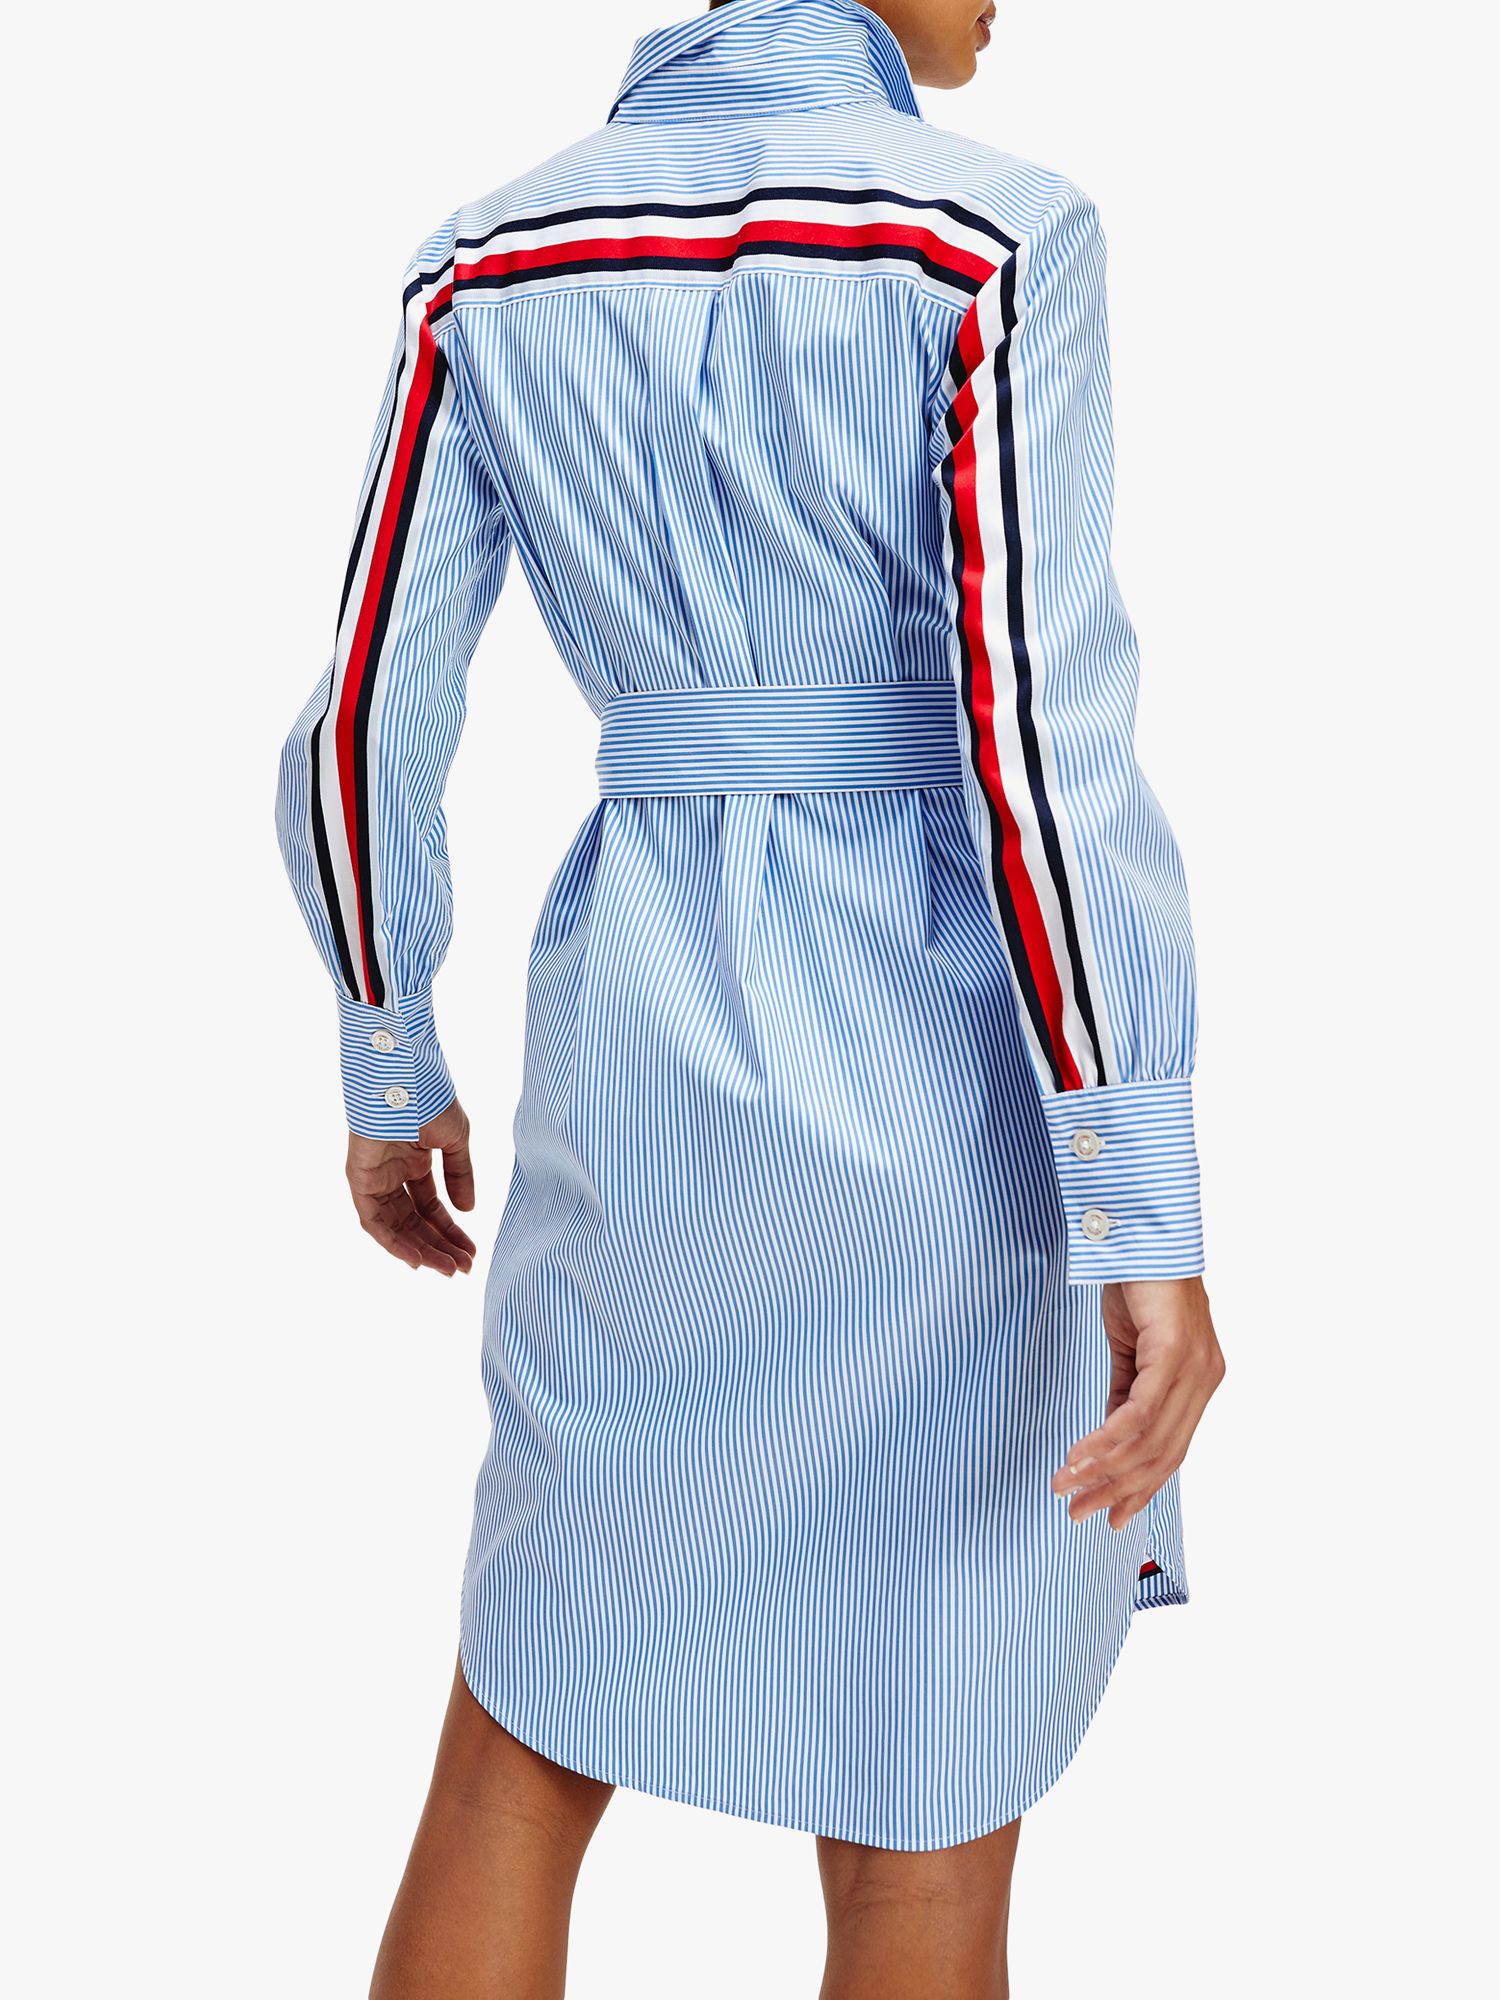 tommy hilfiger blue and white striped dress